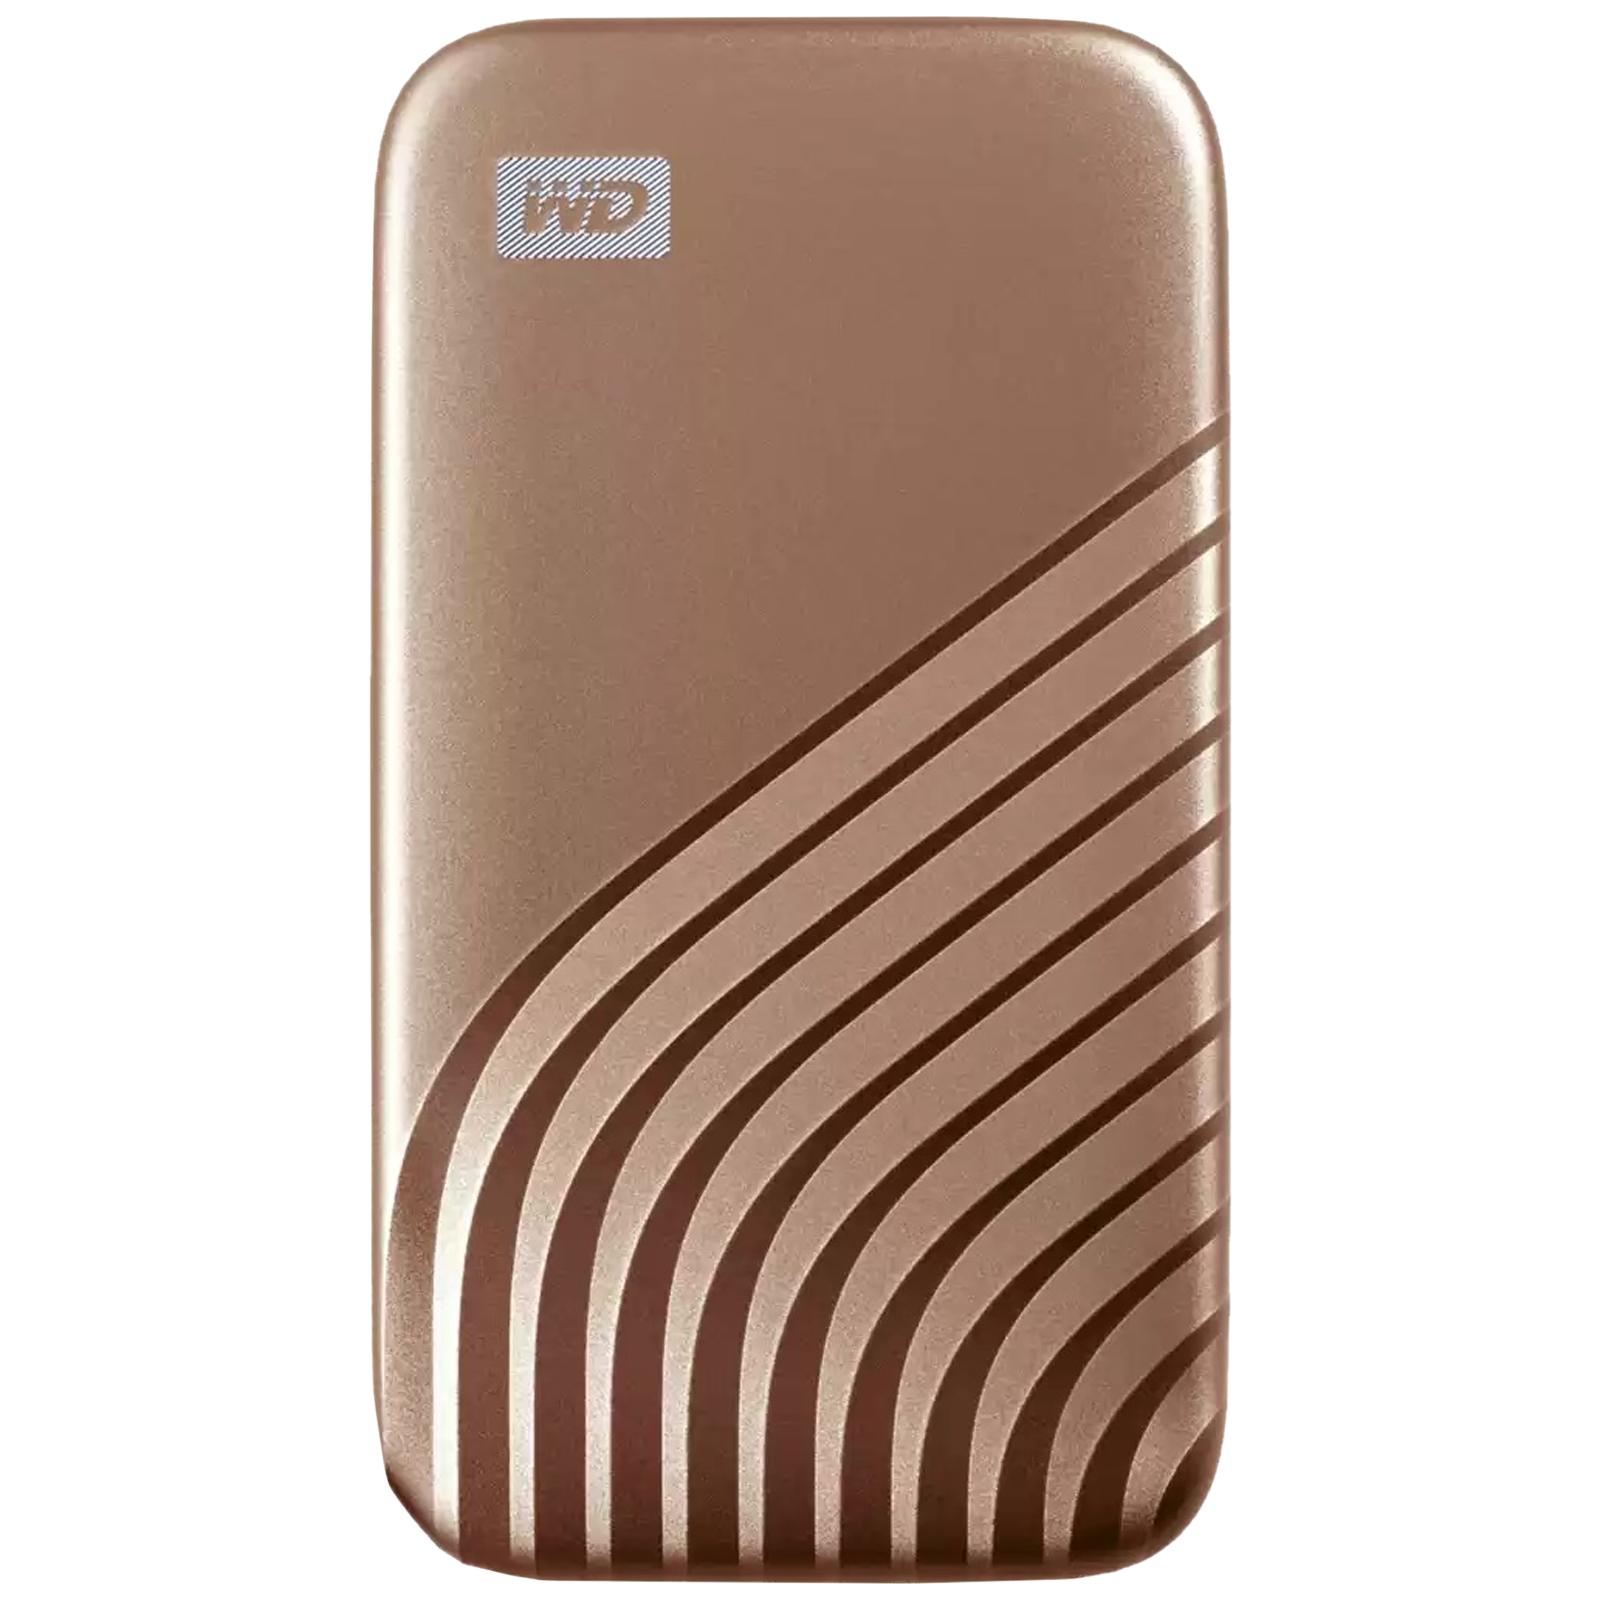 Western Digital My Passport 500GB USB 3.2 (Type-C) Solid State Drive (Password Protection, WDBAGF5000AGD-WESN, Gold)